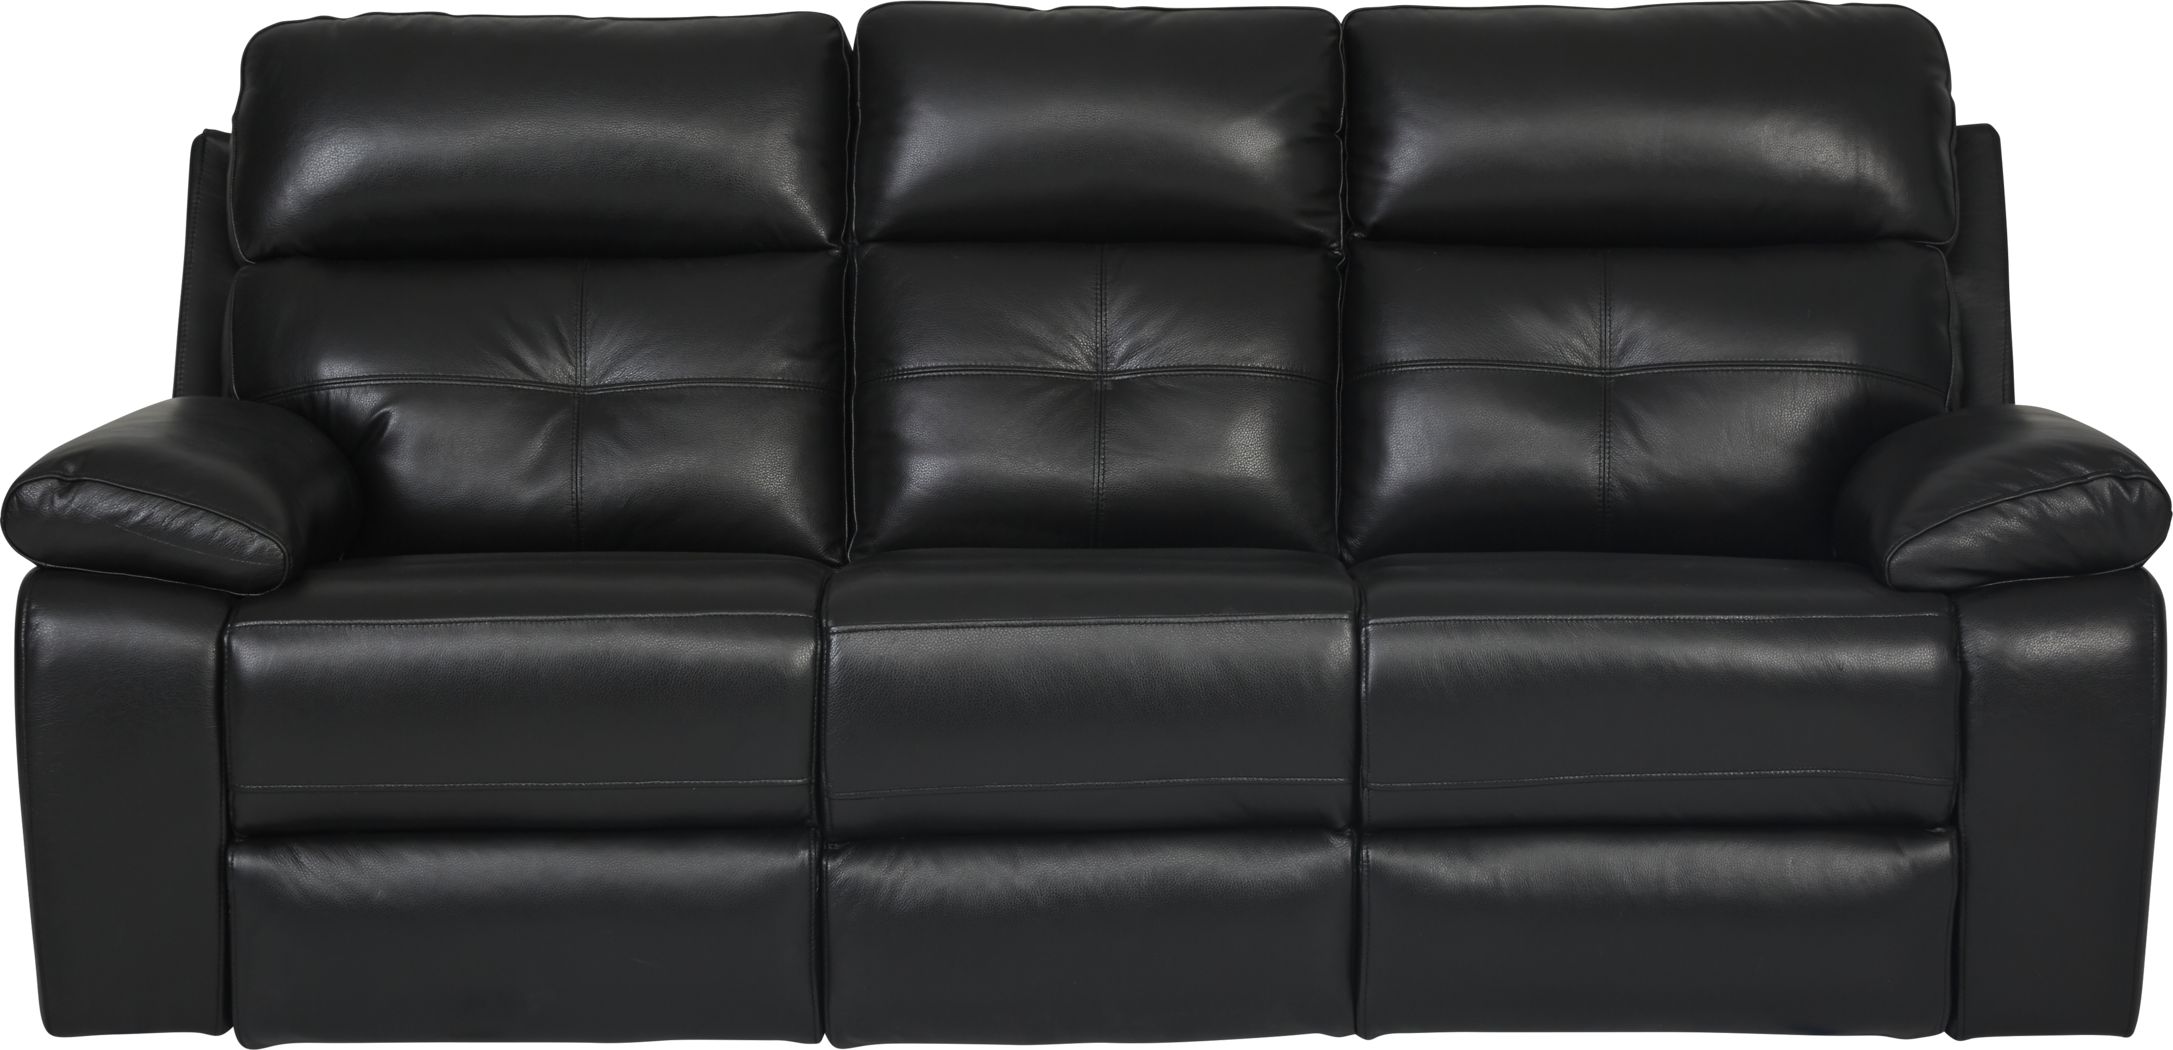 Leather Living Room Furniture, Leather Sofa Recliner Furniture